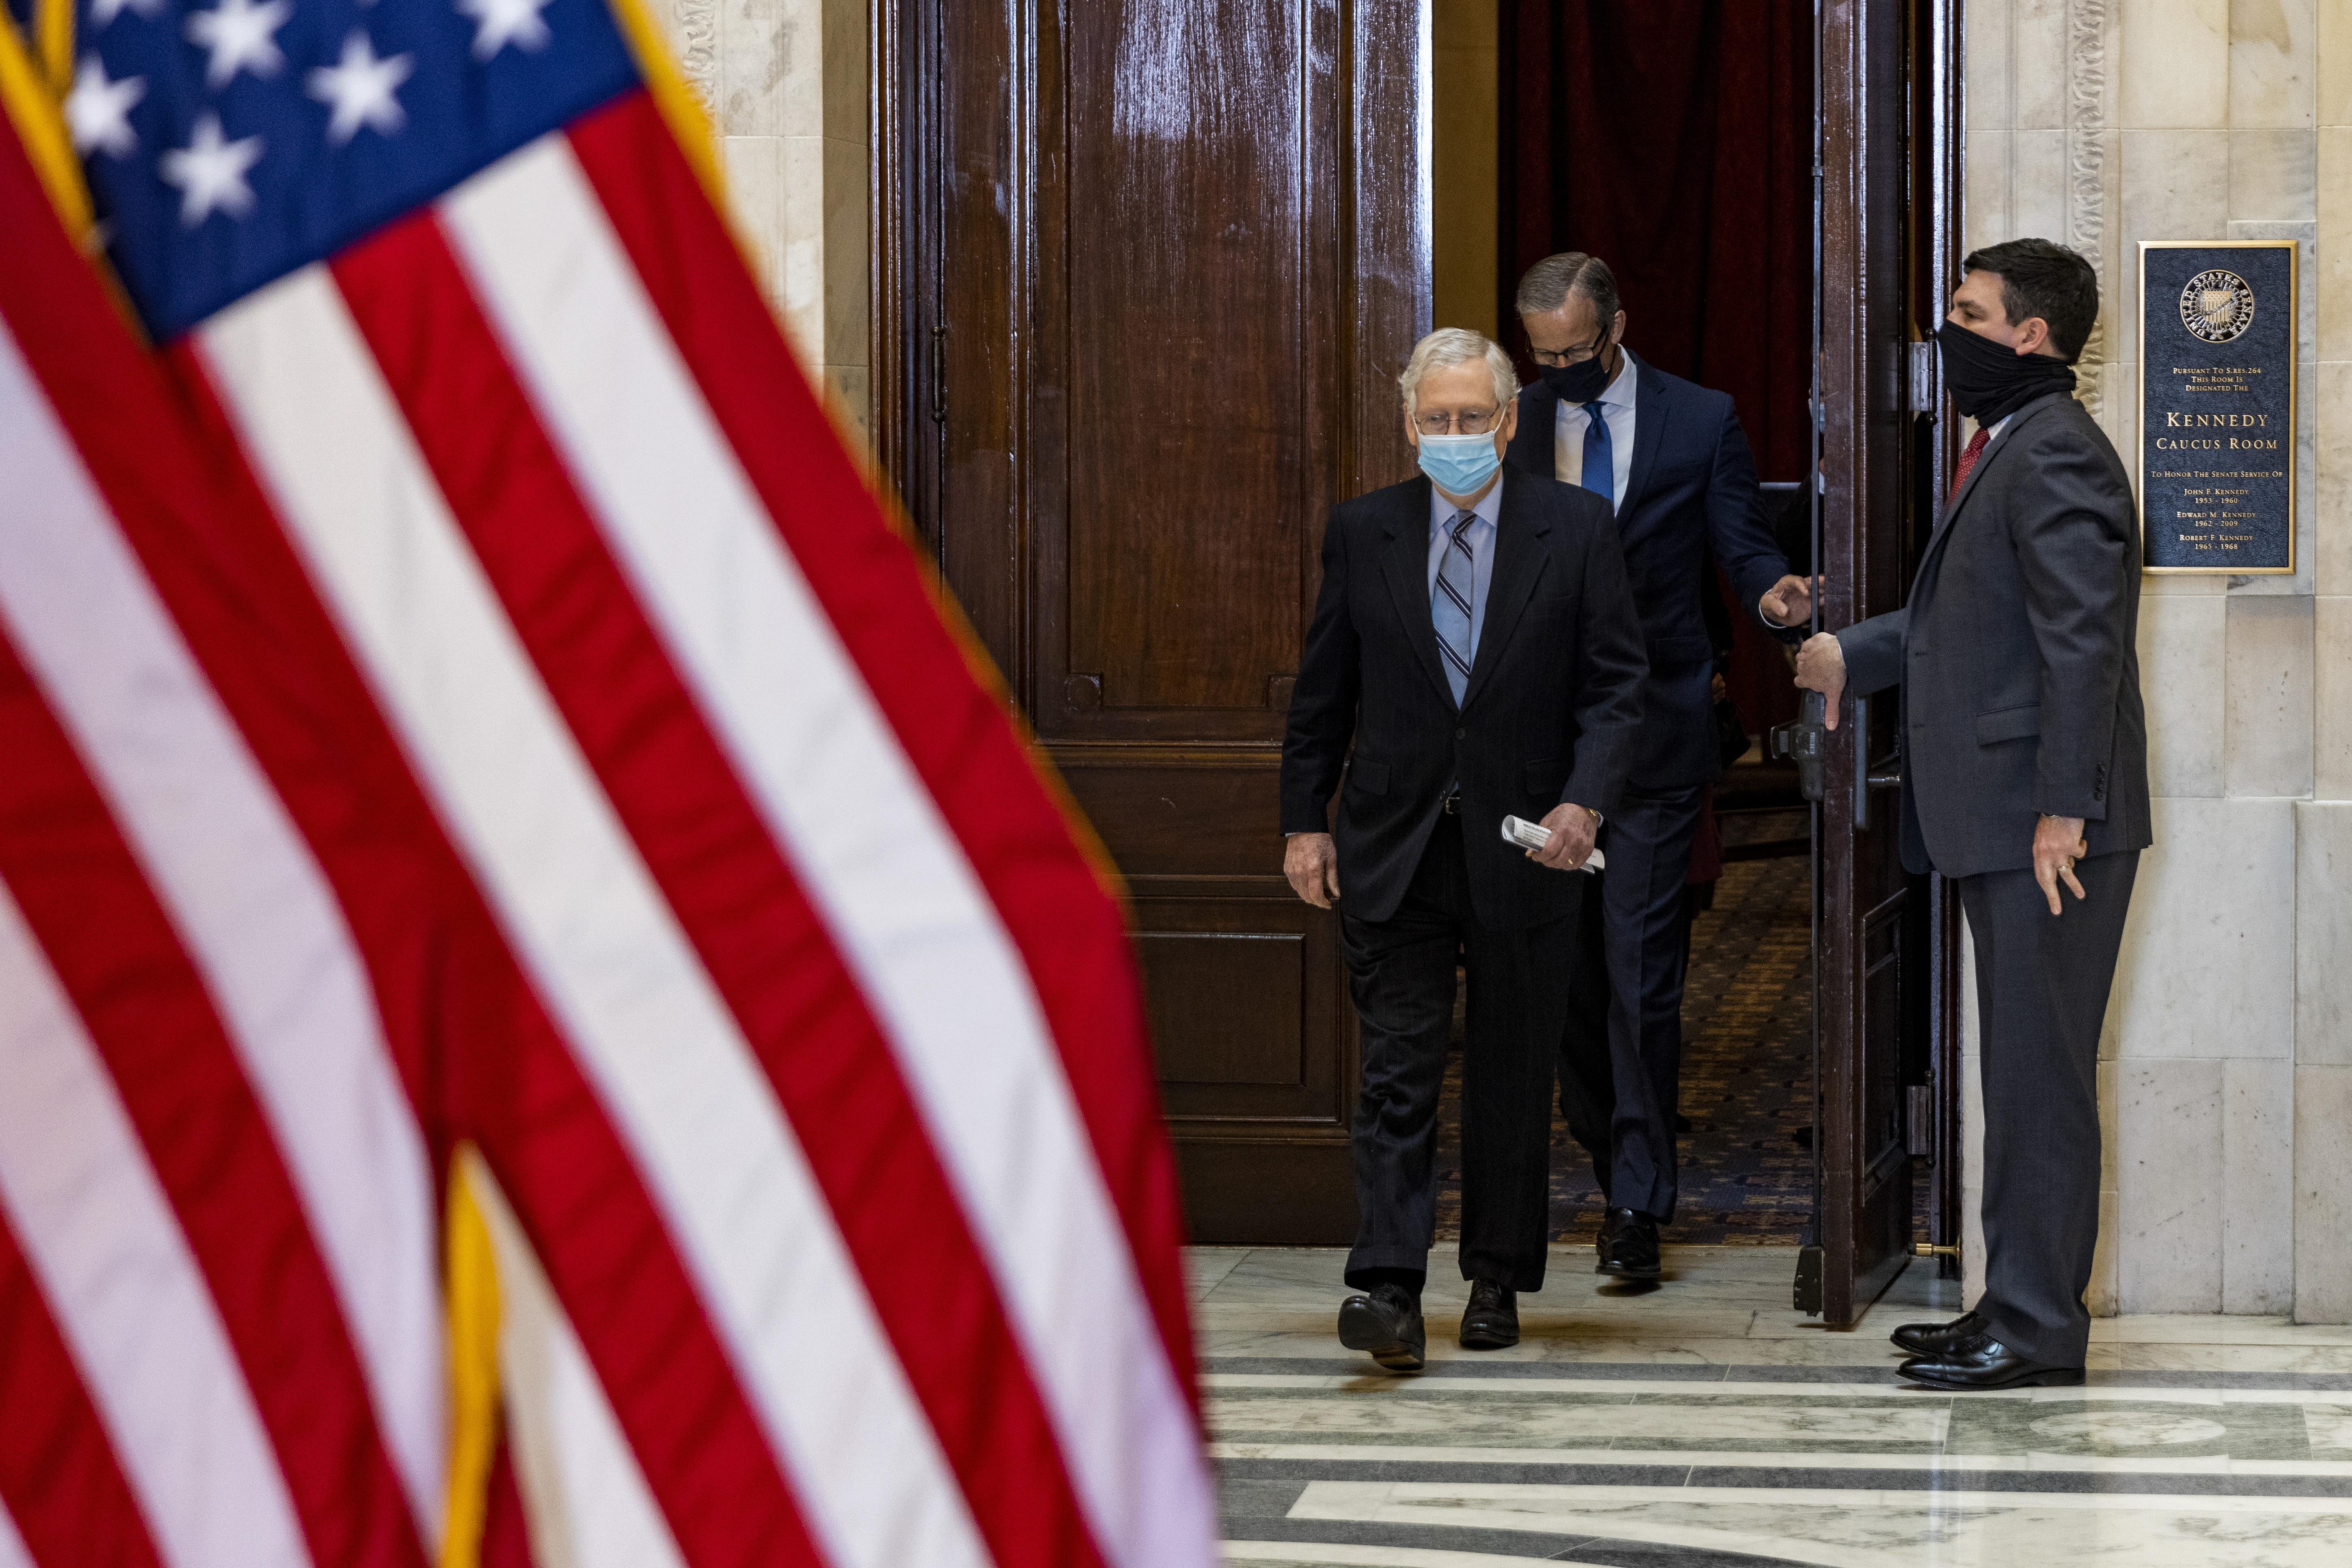 A man wearing a face mask opens a door to let in McConnell and another man, both of whom are wearing face masks. A U.S. flag is seen in the foreground.